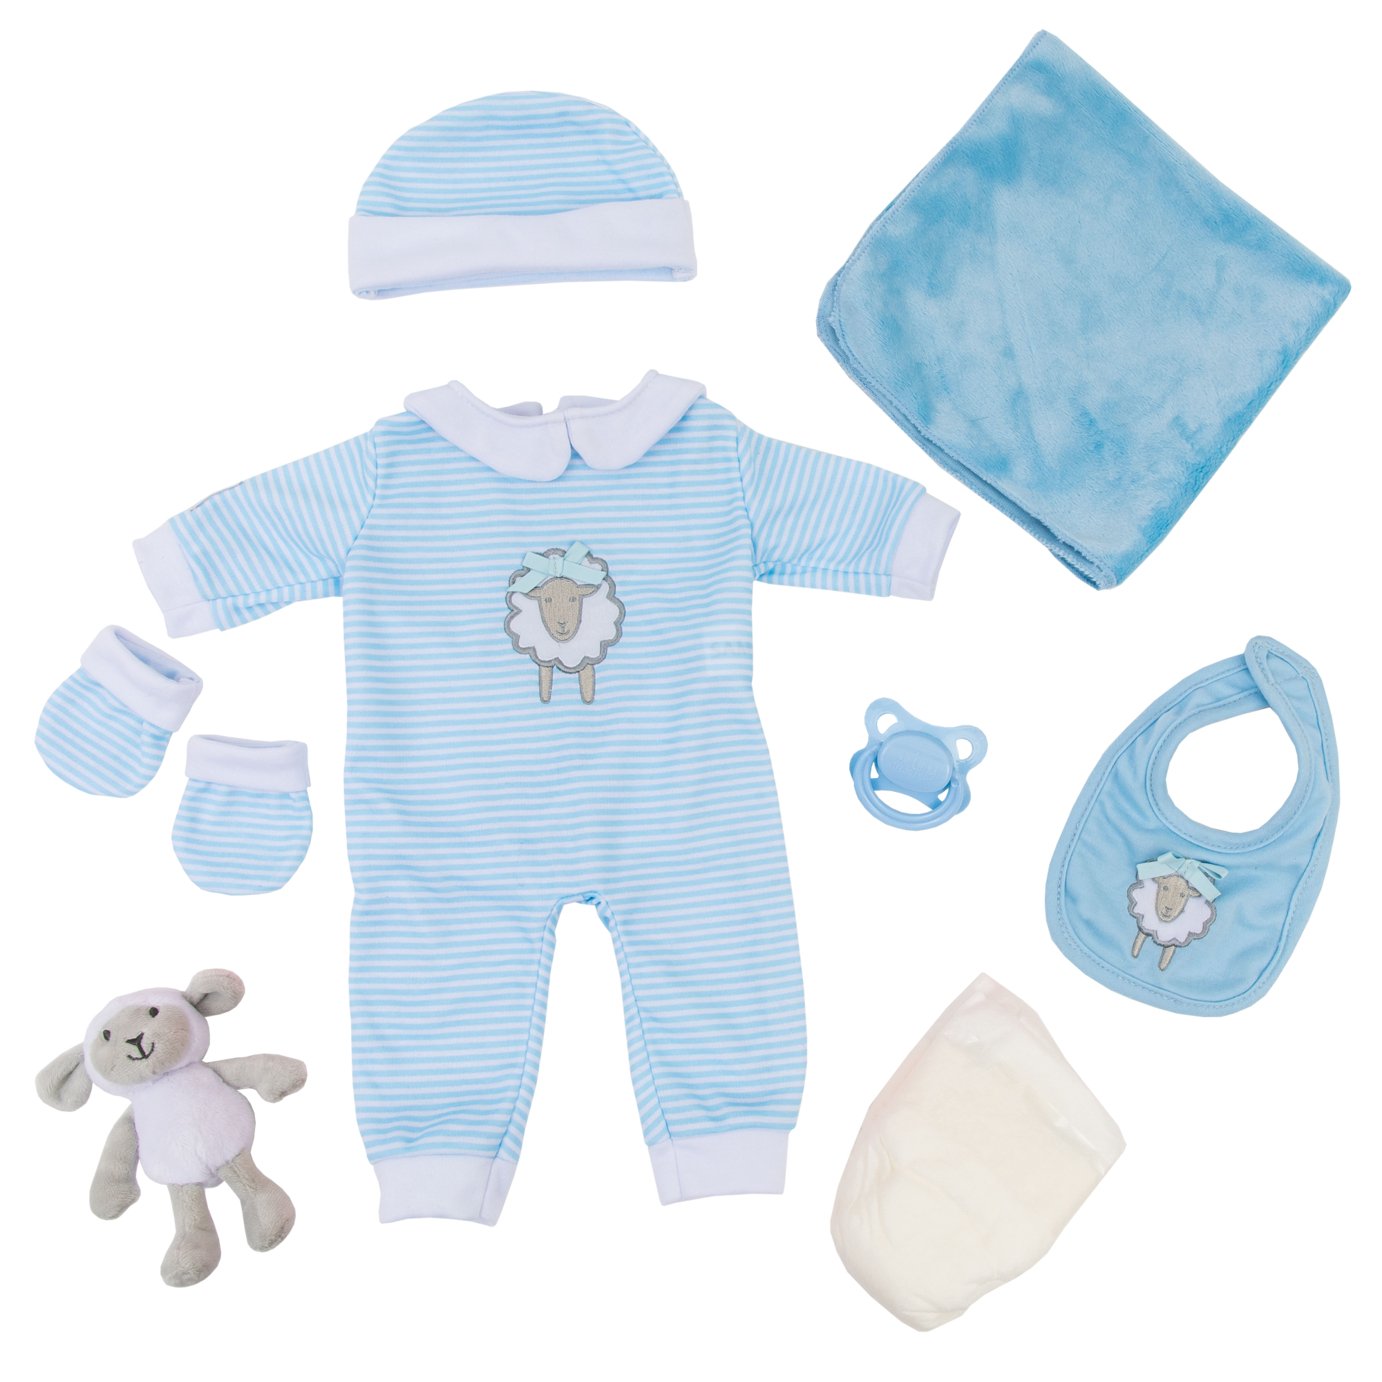 Tiny Treasures Layette Blue Gift Set Review